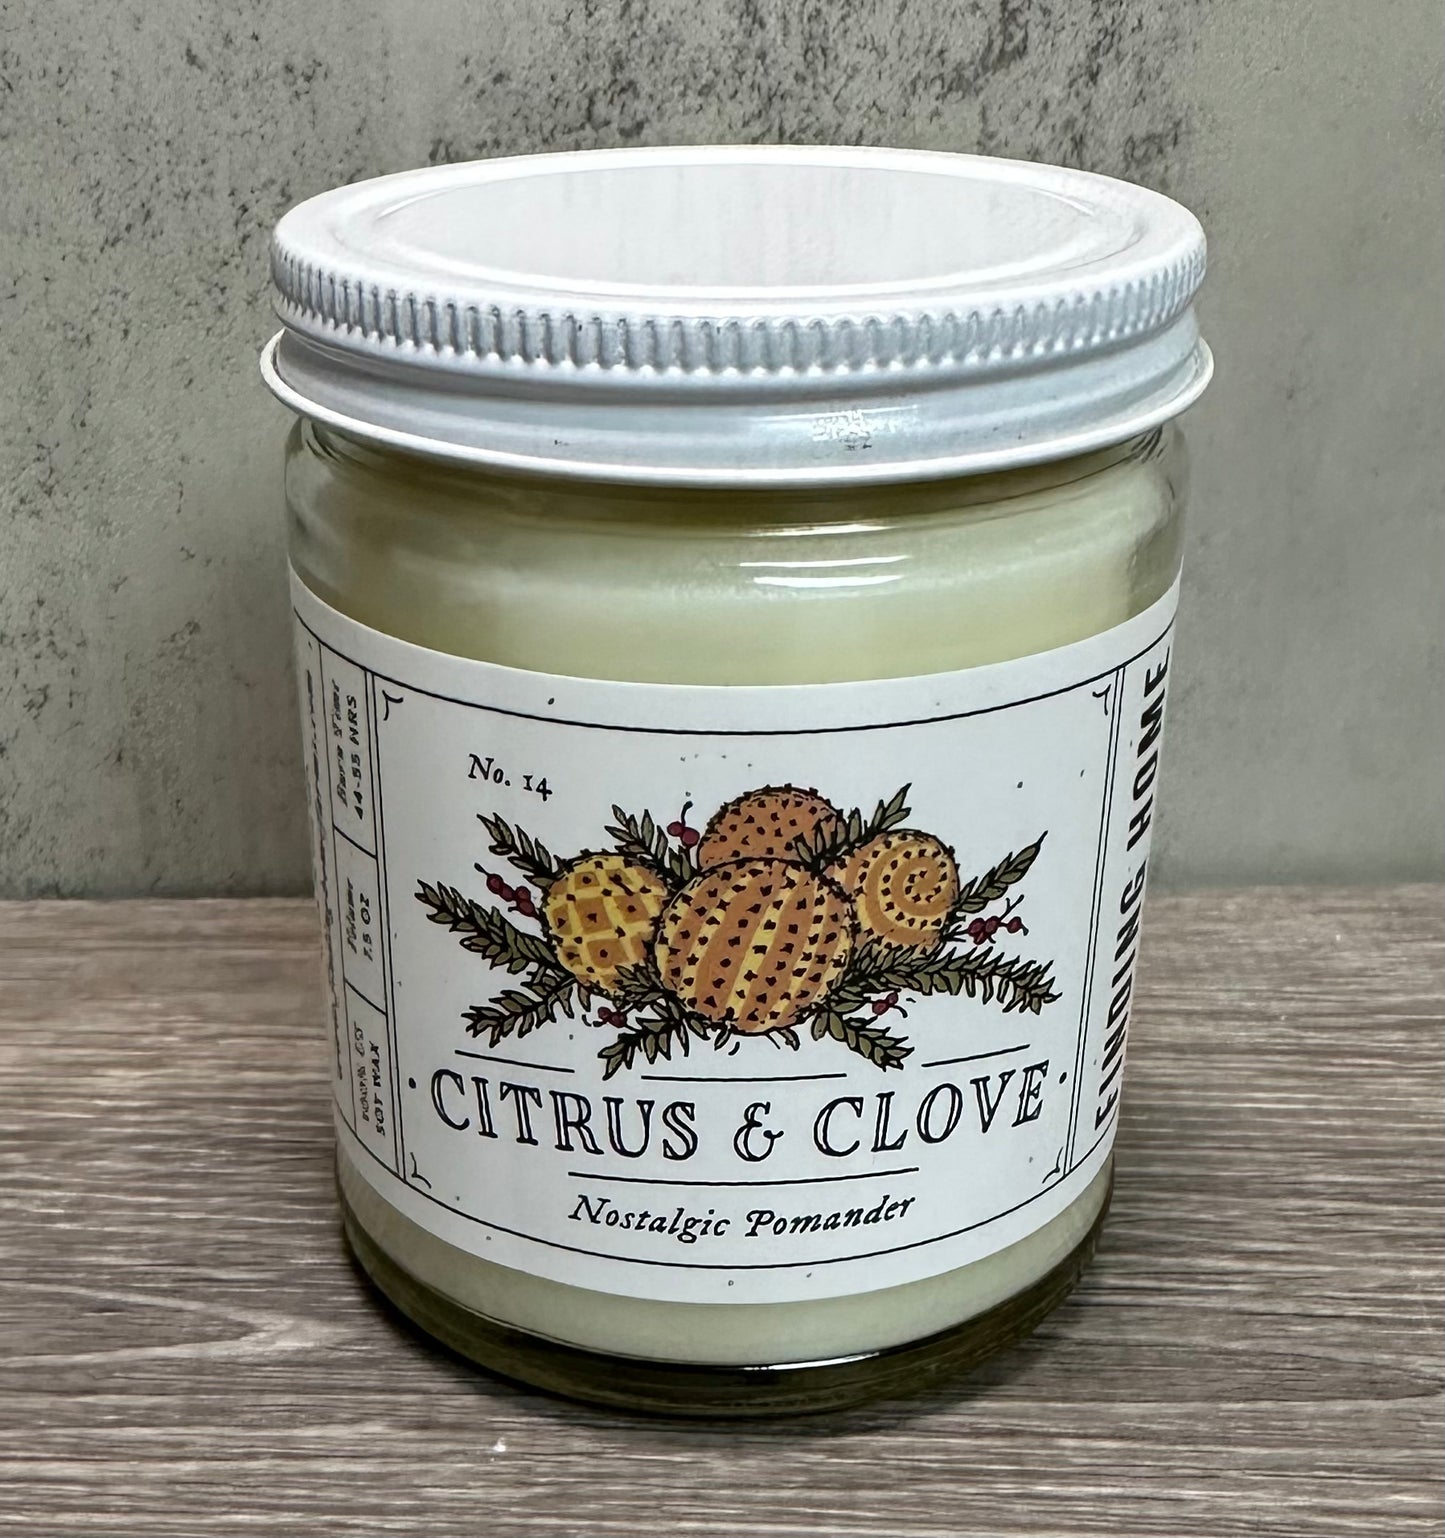 Finding Home Farms Citrus & Clove 7.5 oz Soy Wax Candle